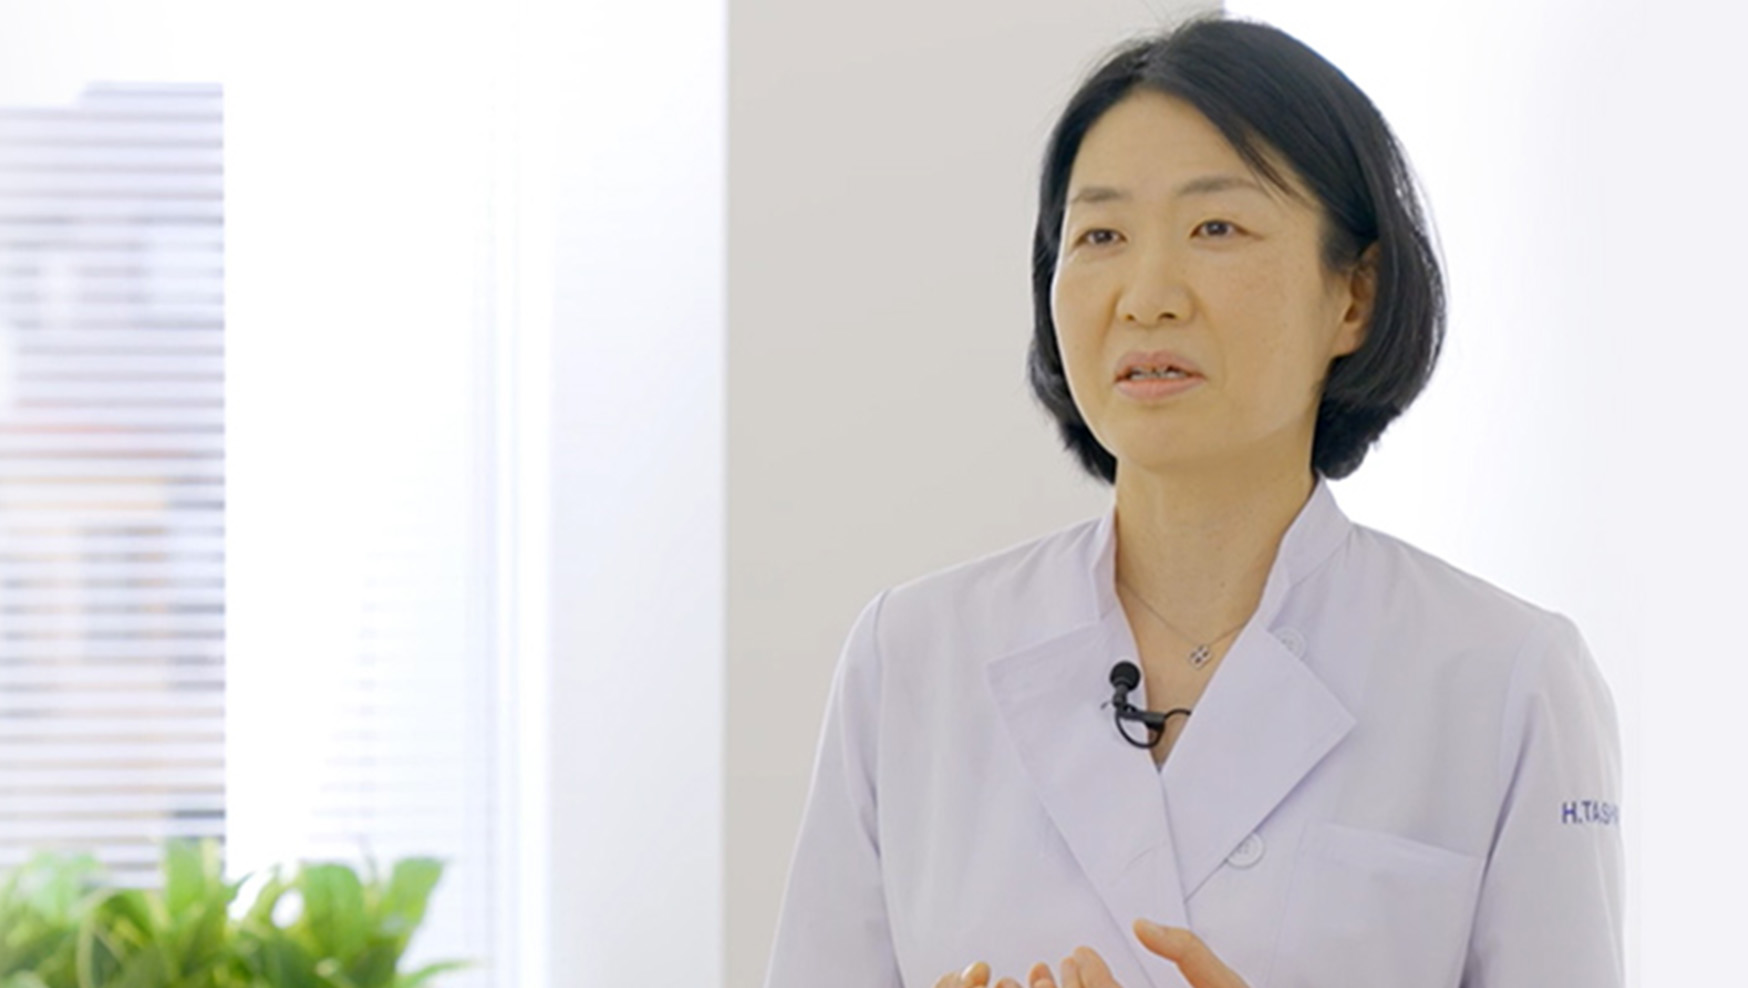 [Teikyo University ? National Geographic collaboration video] Research introduction of the Hematology Oncology Laboratory Internal Medicine, School of School of Medicine "Cure blood cancer without transplantation by establishing a new cell therapy"